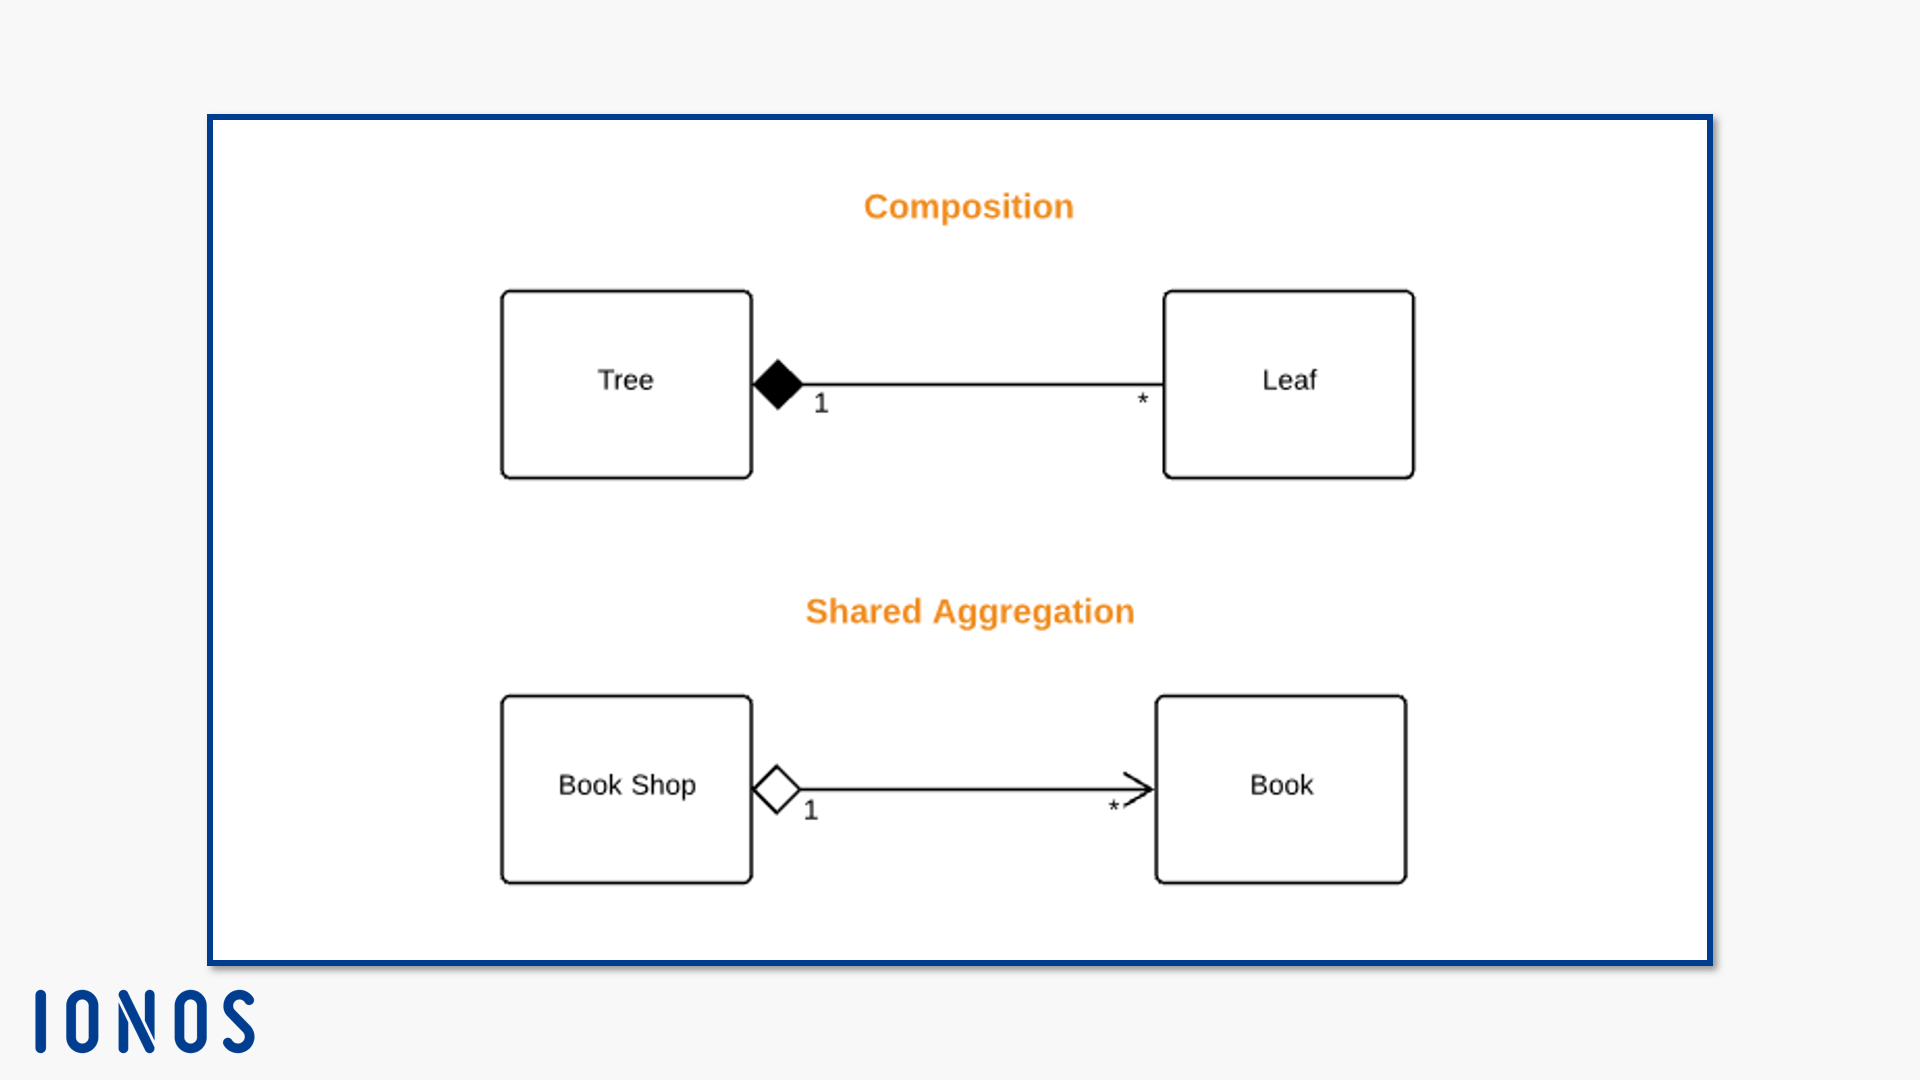 UML notation for composition and shared aggregation.